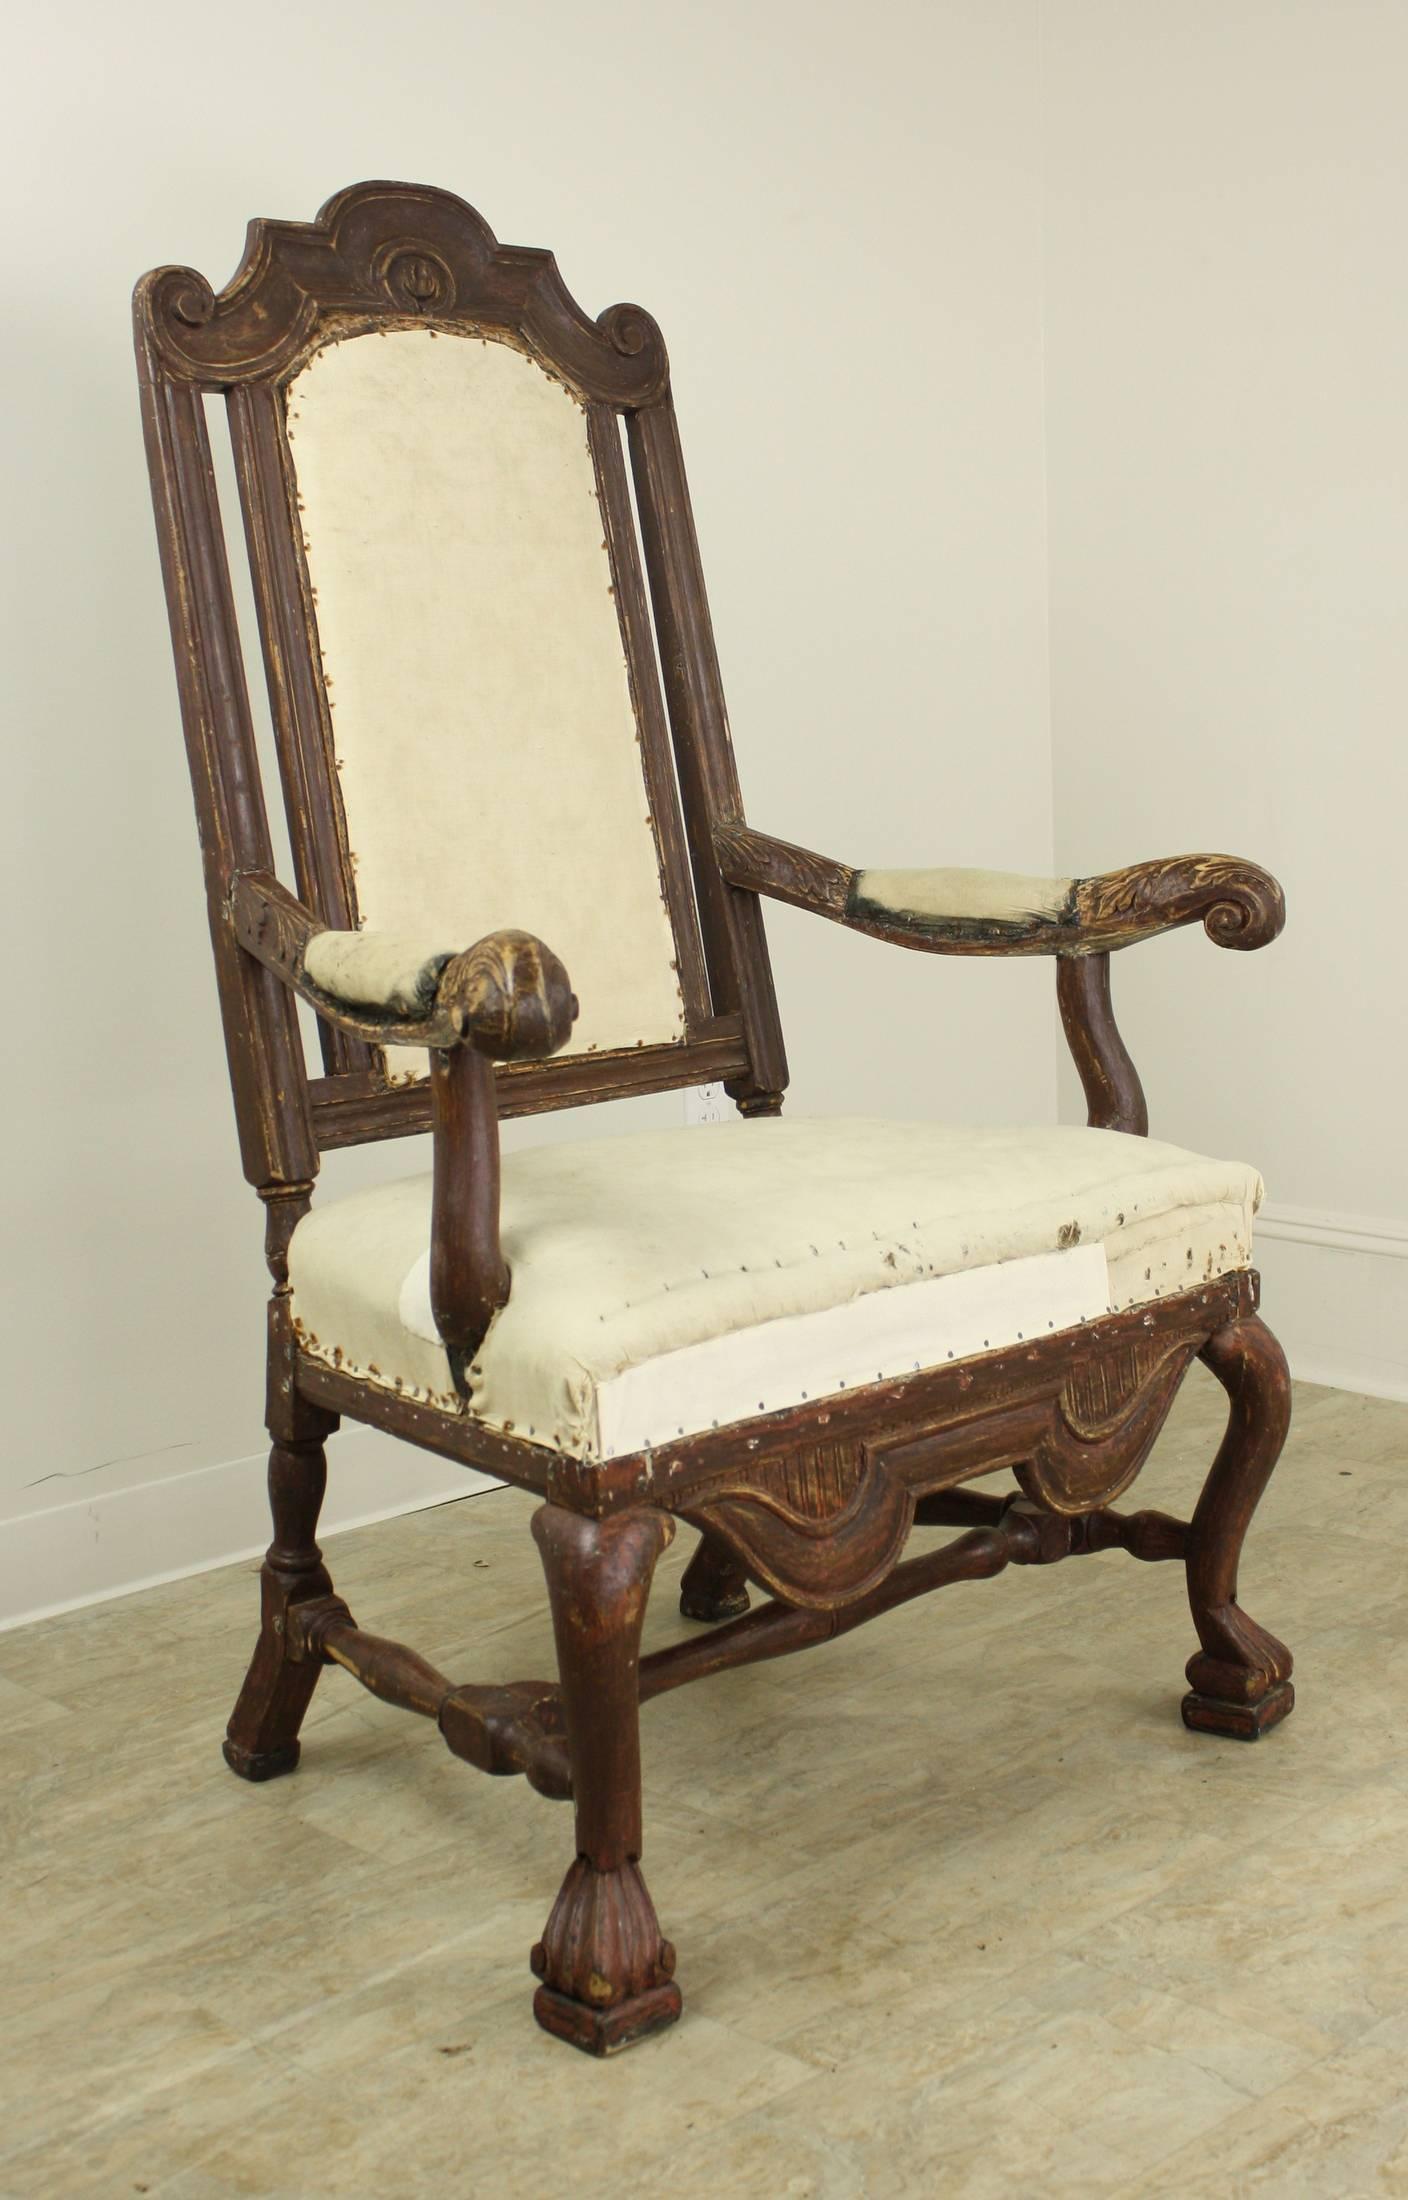 This is a very fanciful chair, very immediately identifiable as coming from the Baroque period, c17thC.  It deserves to stand alone visually, as a museum quality piece, and it is strong and sturdy.  It was originally painted, in several colors, as